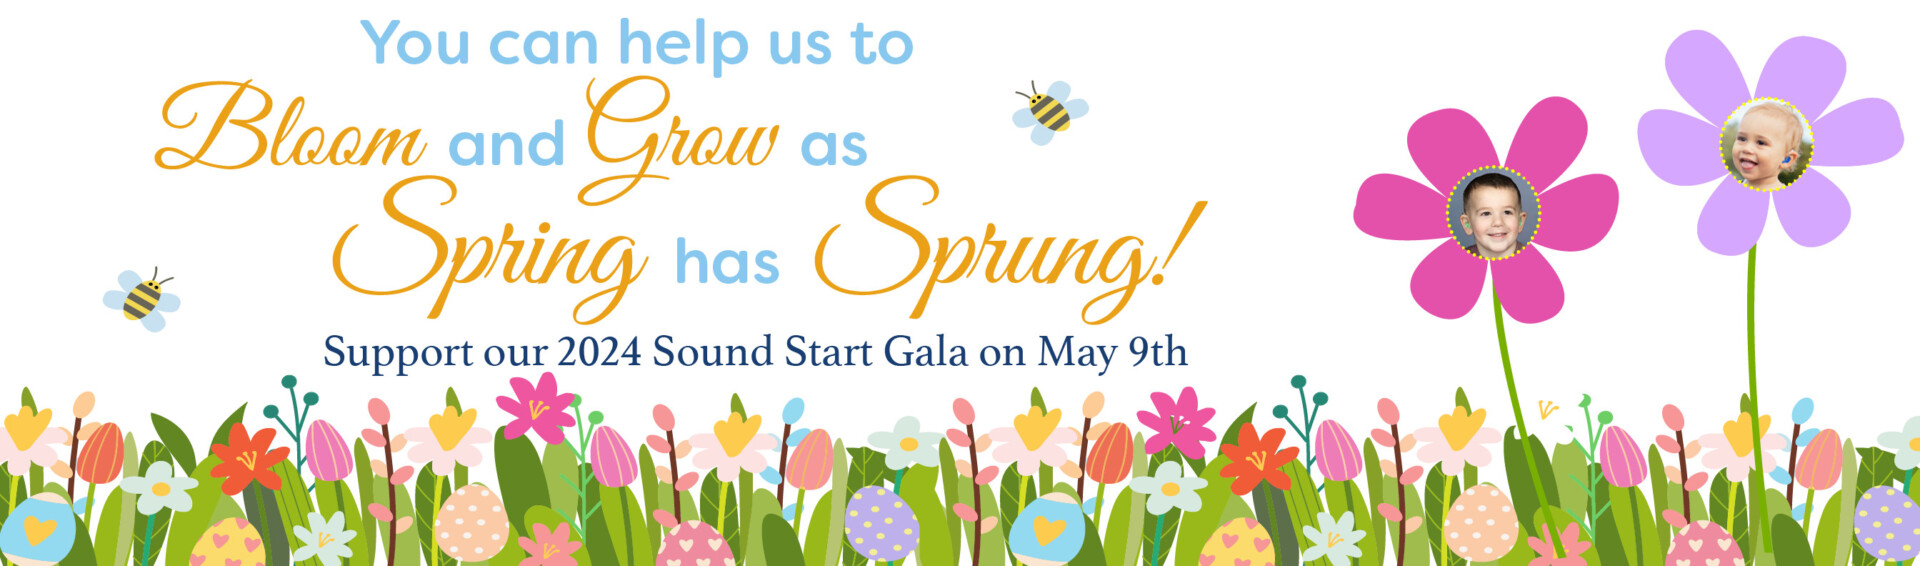 Support our 2024 Sound Start Gala on May 9th